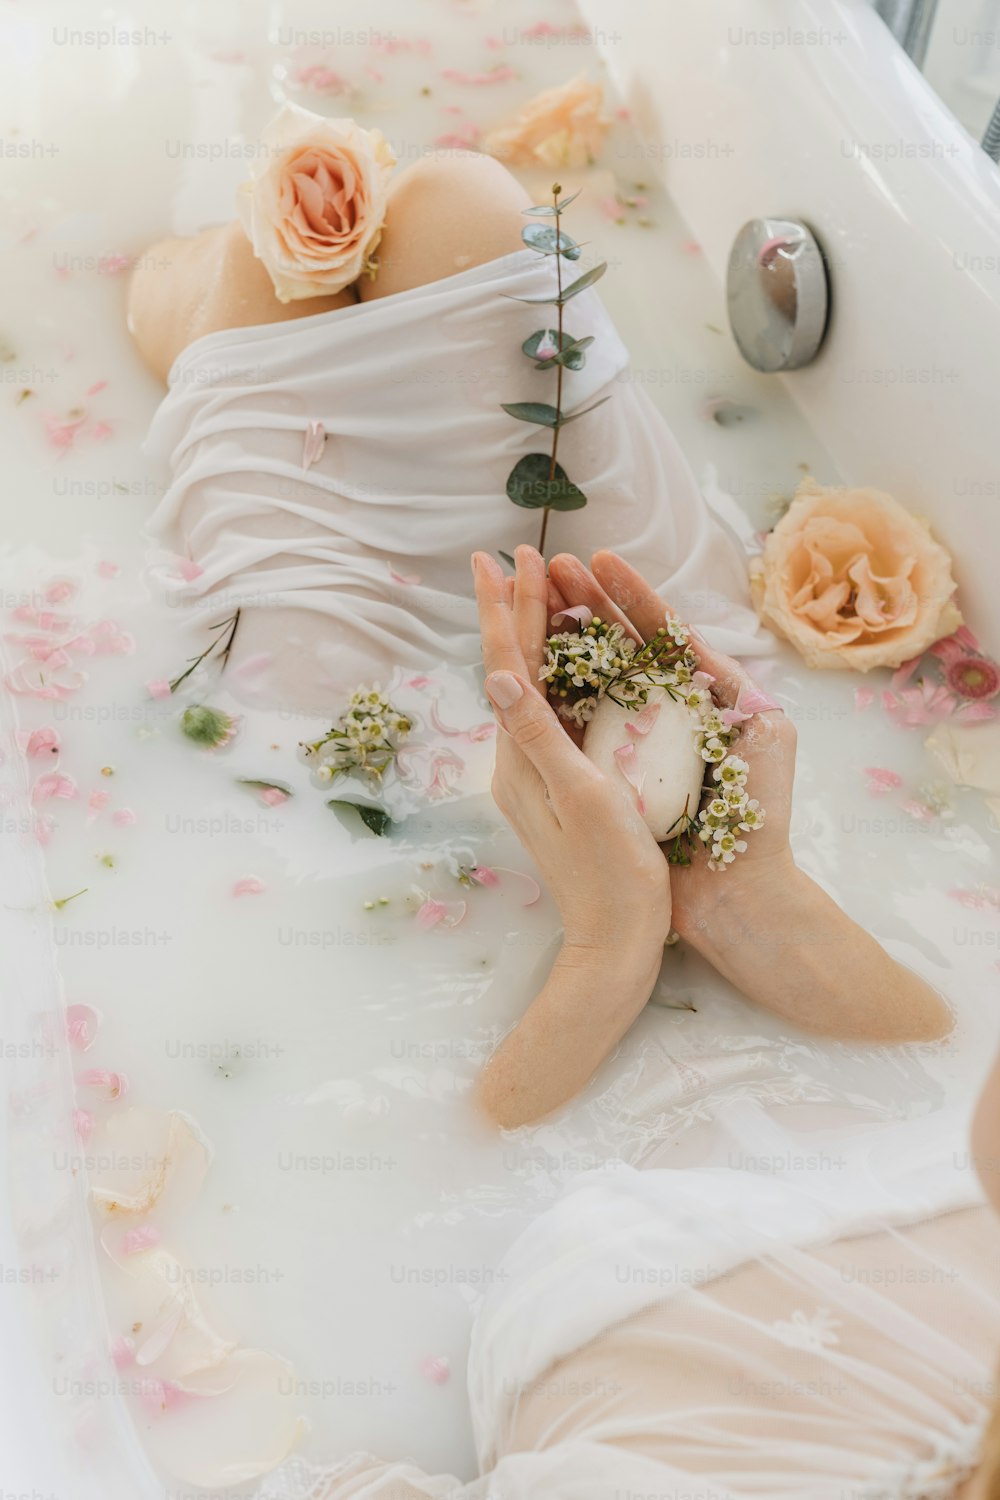 a woman in a bathtub with flowers on her head